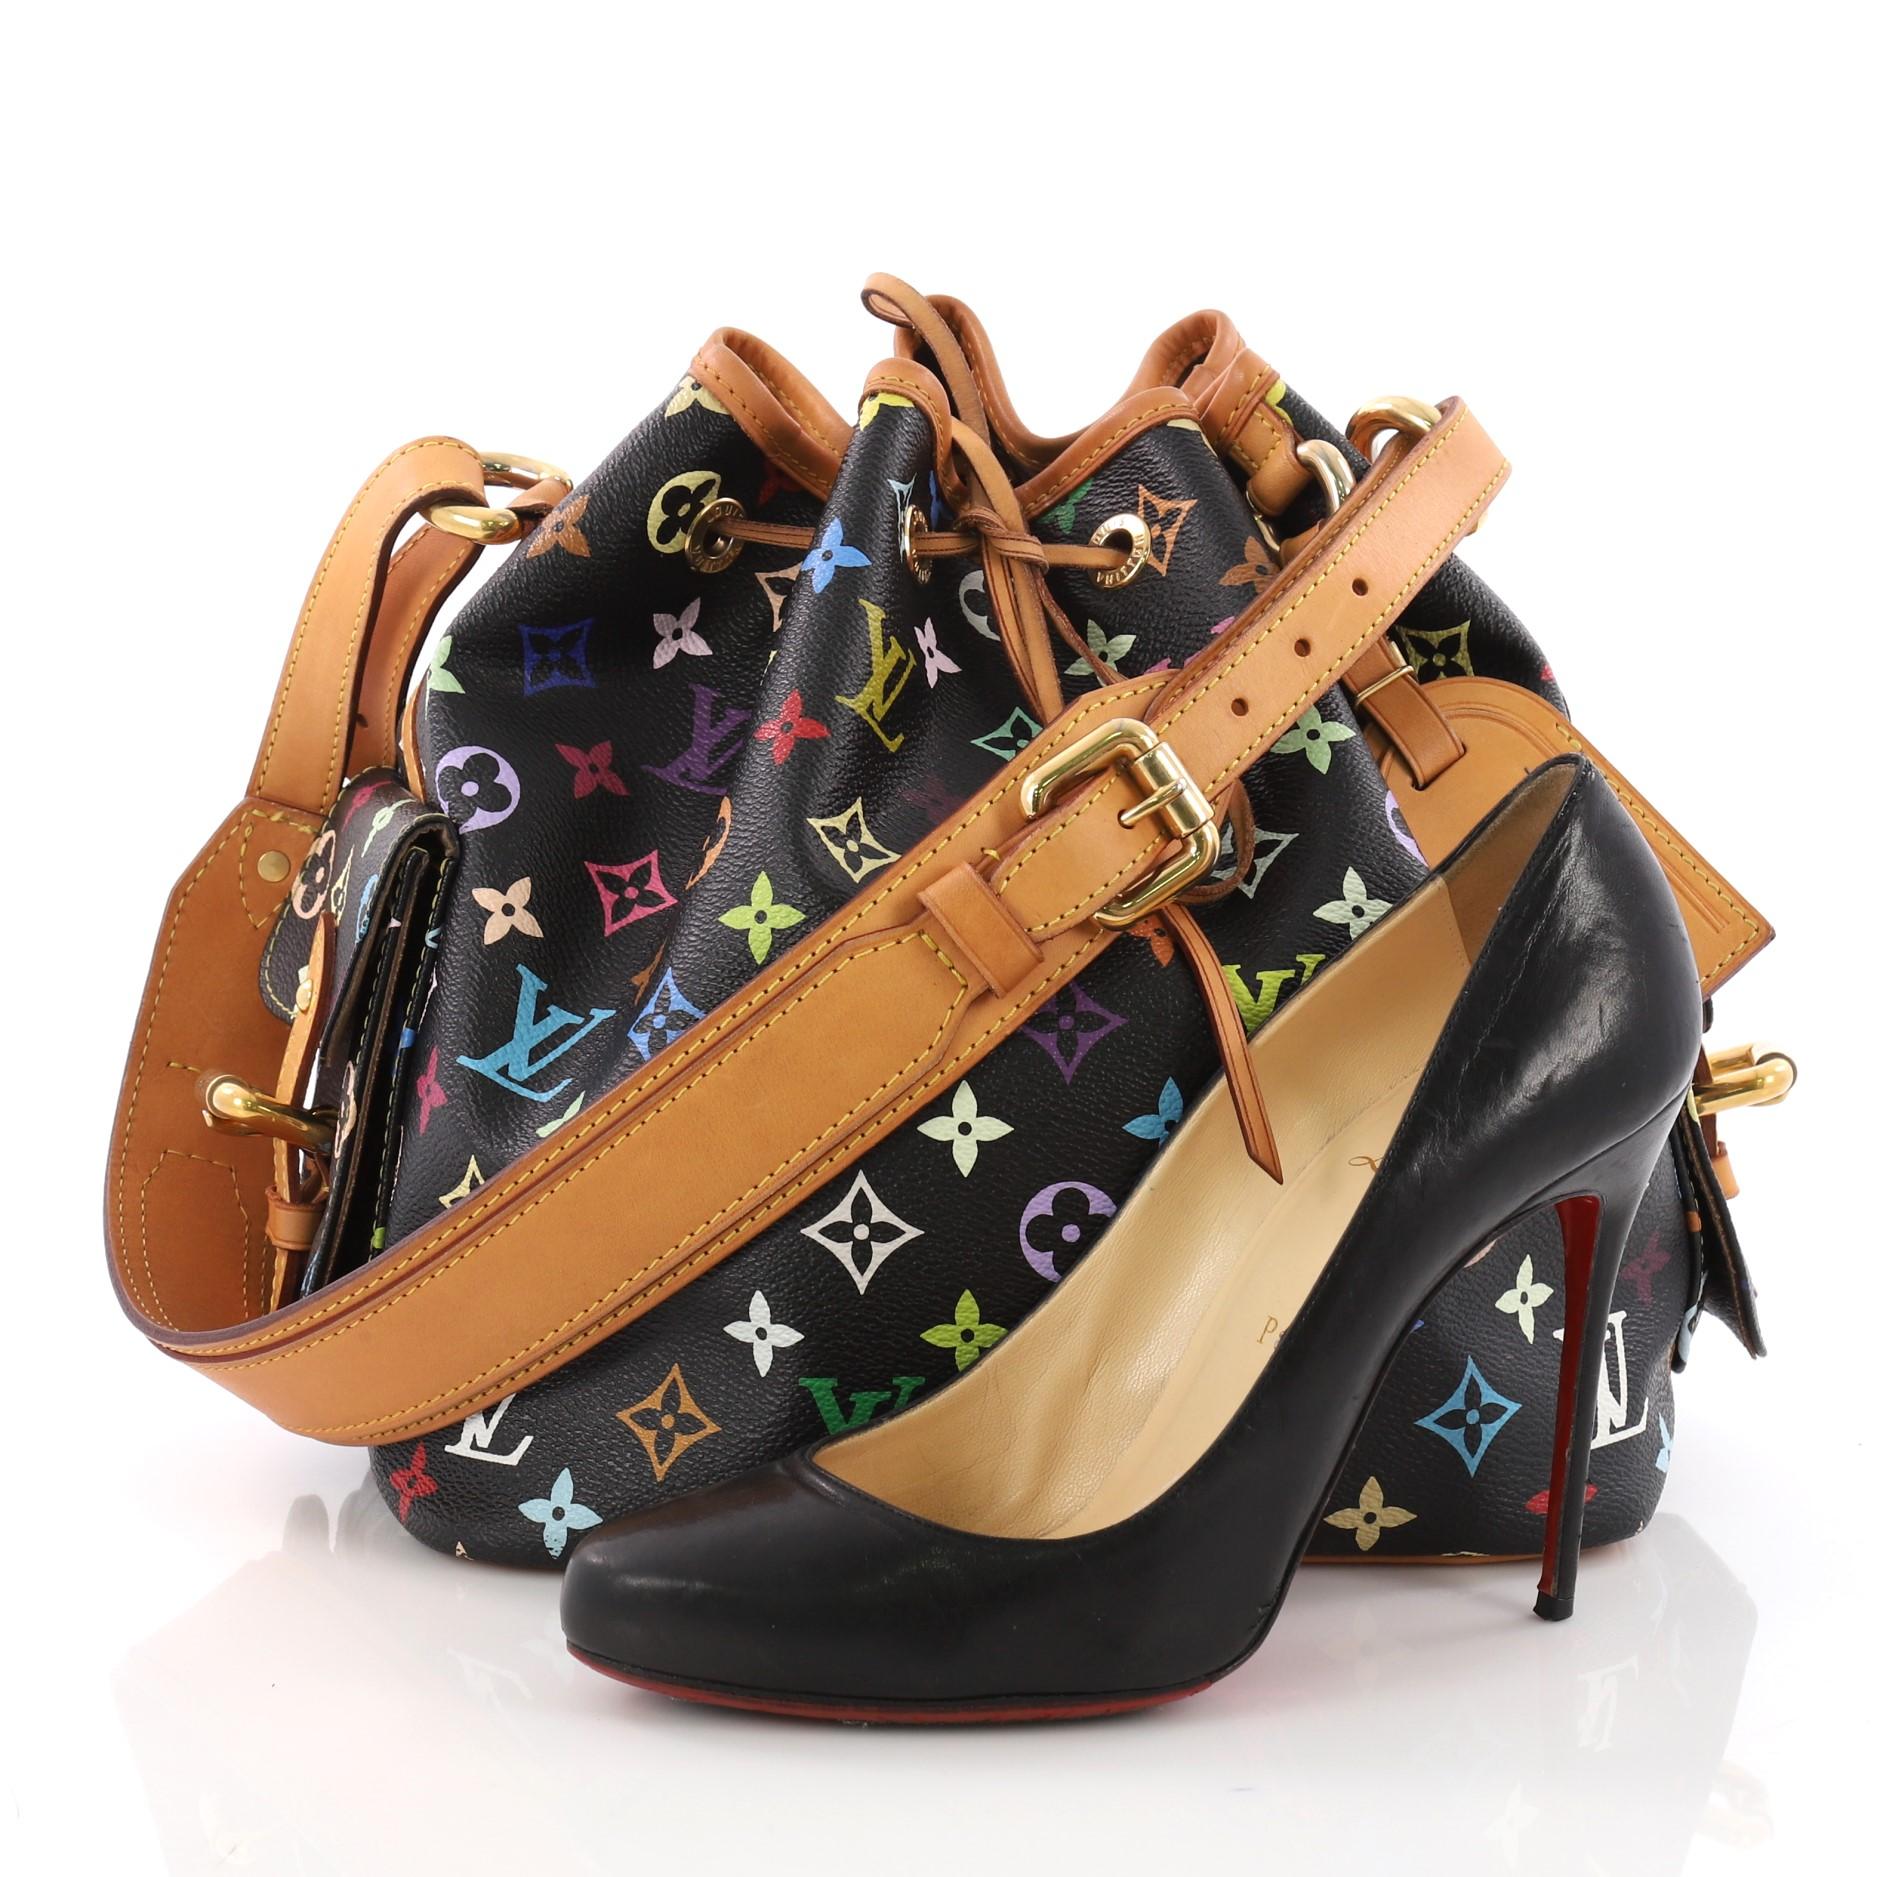 This Louis Vuitton Petit Noe Handbag Monogram Multicolor, crafted from black monogram coated canvas with vachetta leather base and trims, features leather drawstrings, adjustable shoulder straps and gold-tone hardware. Its drawstring closure opens